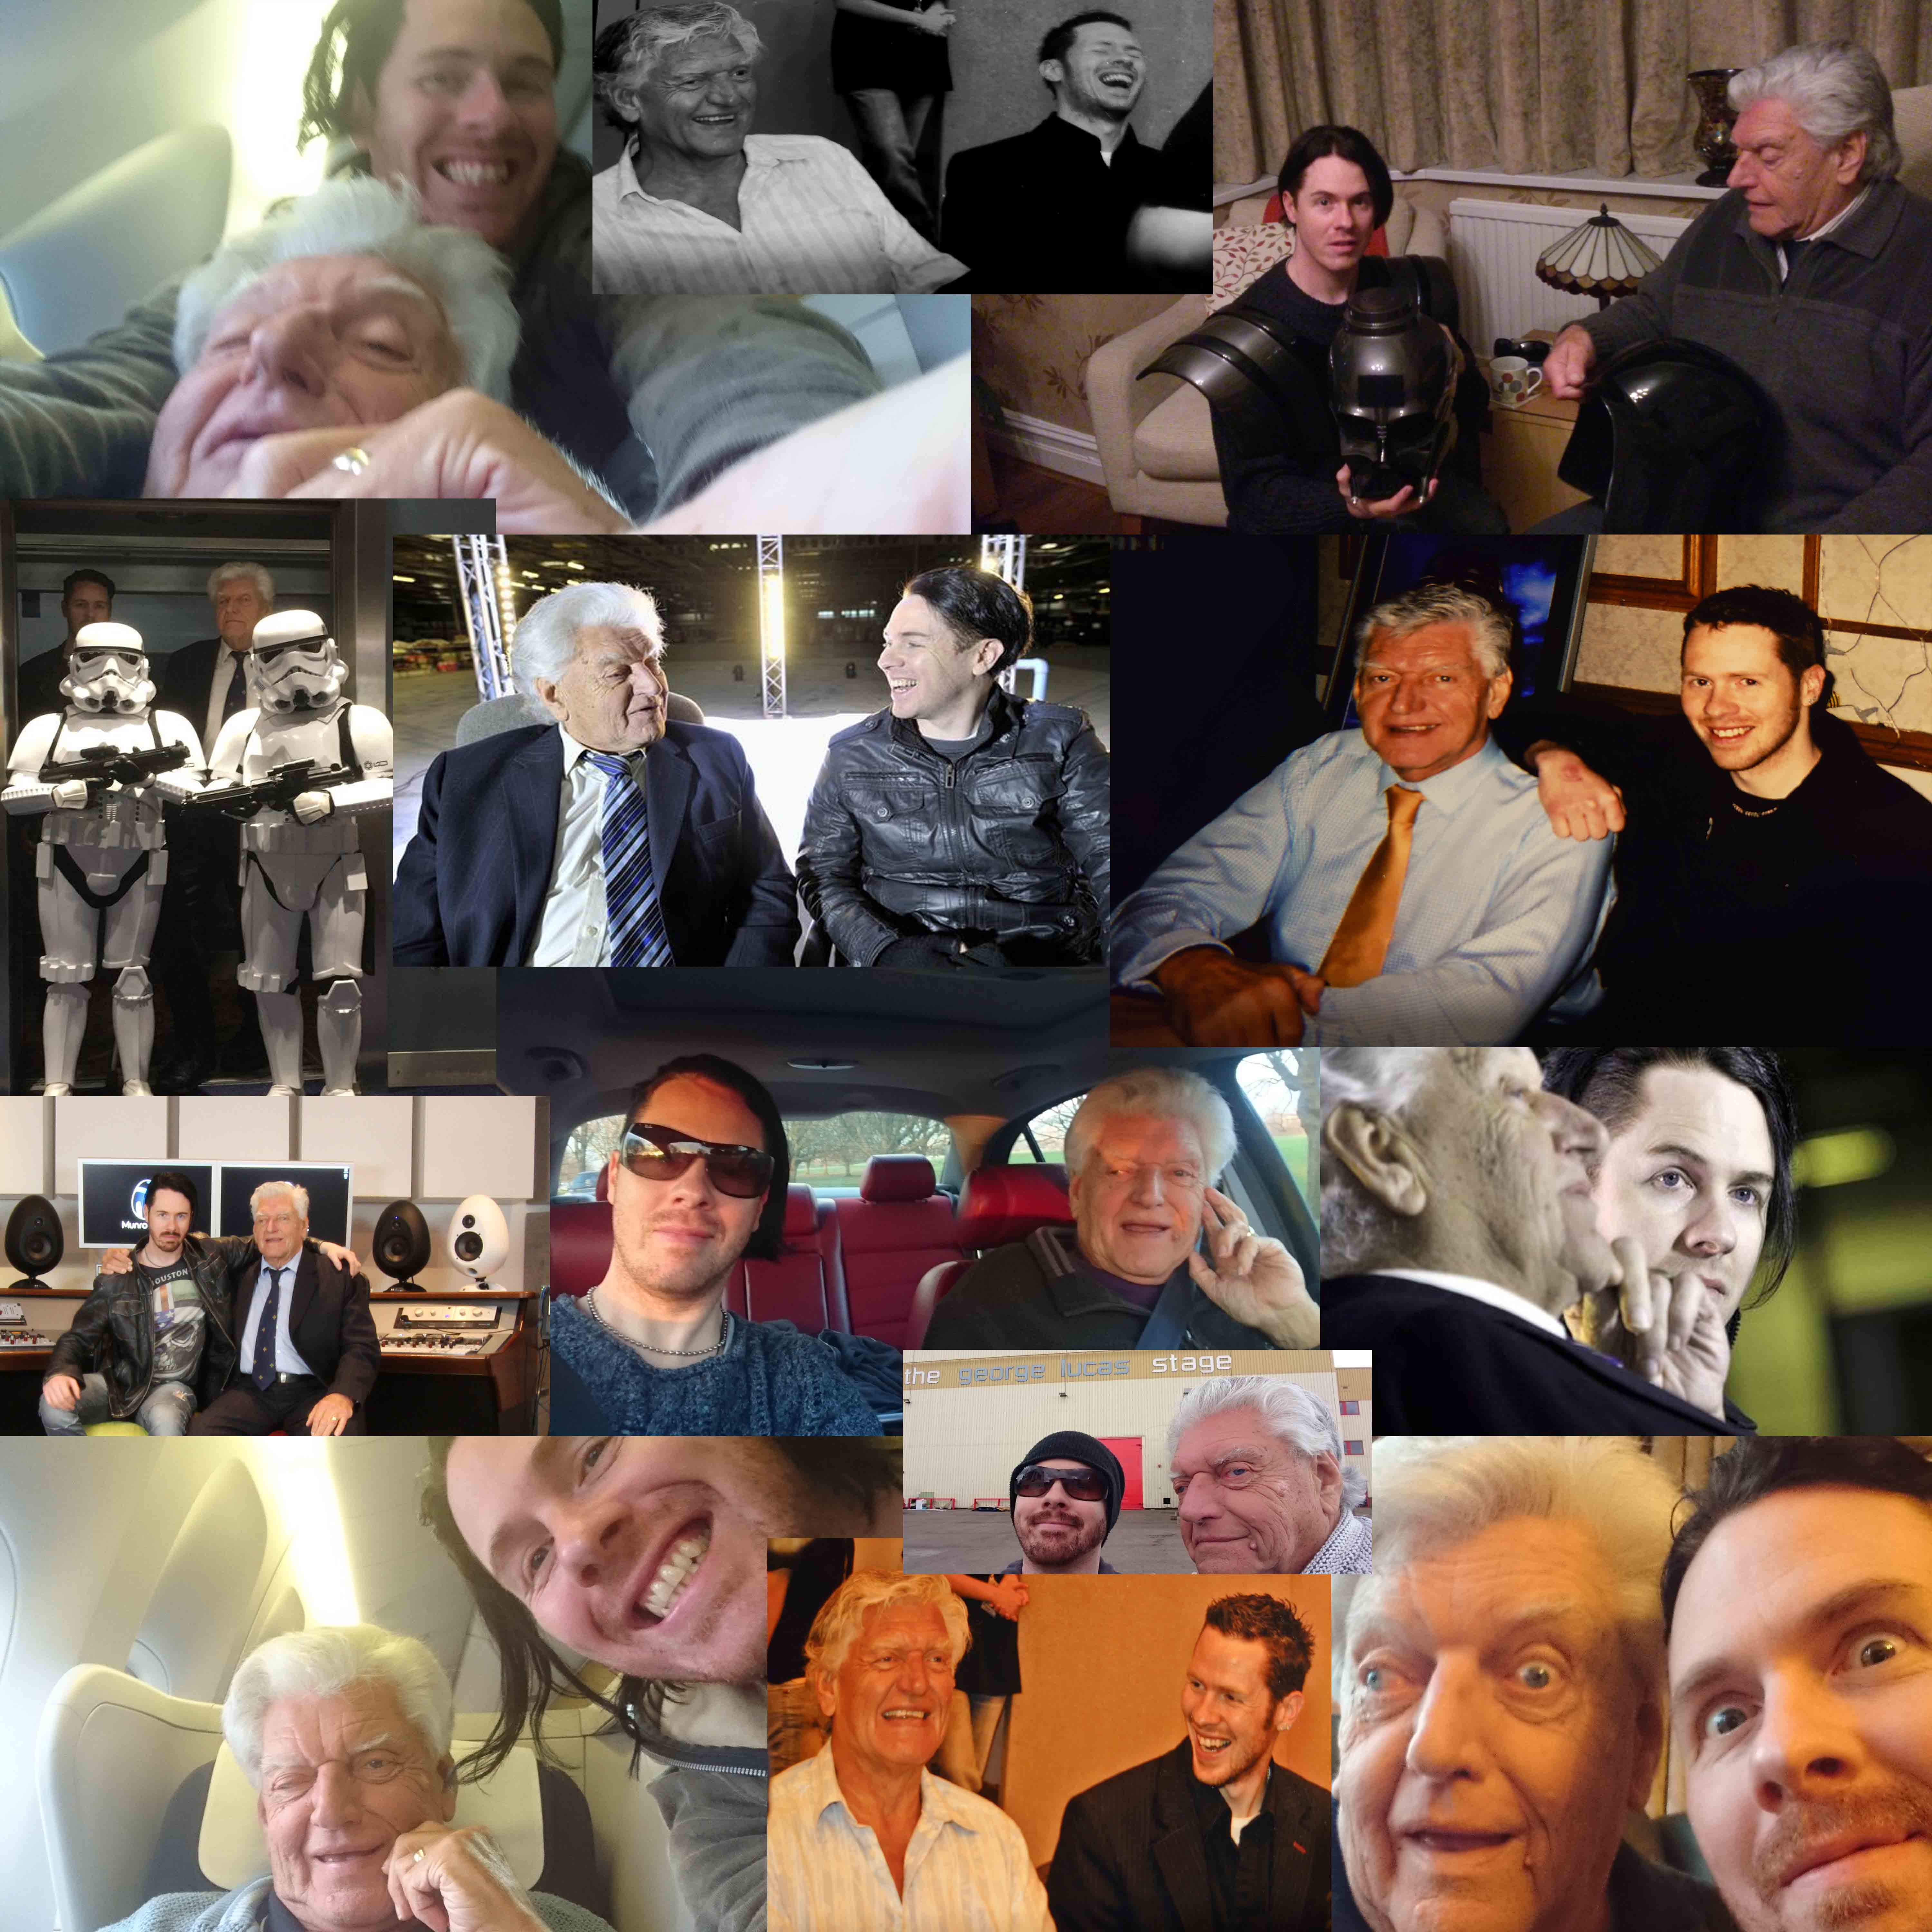 Jayce Lewis,Dave Prowse, Darth Vader, Jayce Lewis and Dave Prowse, Starwars .